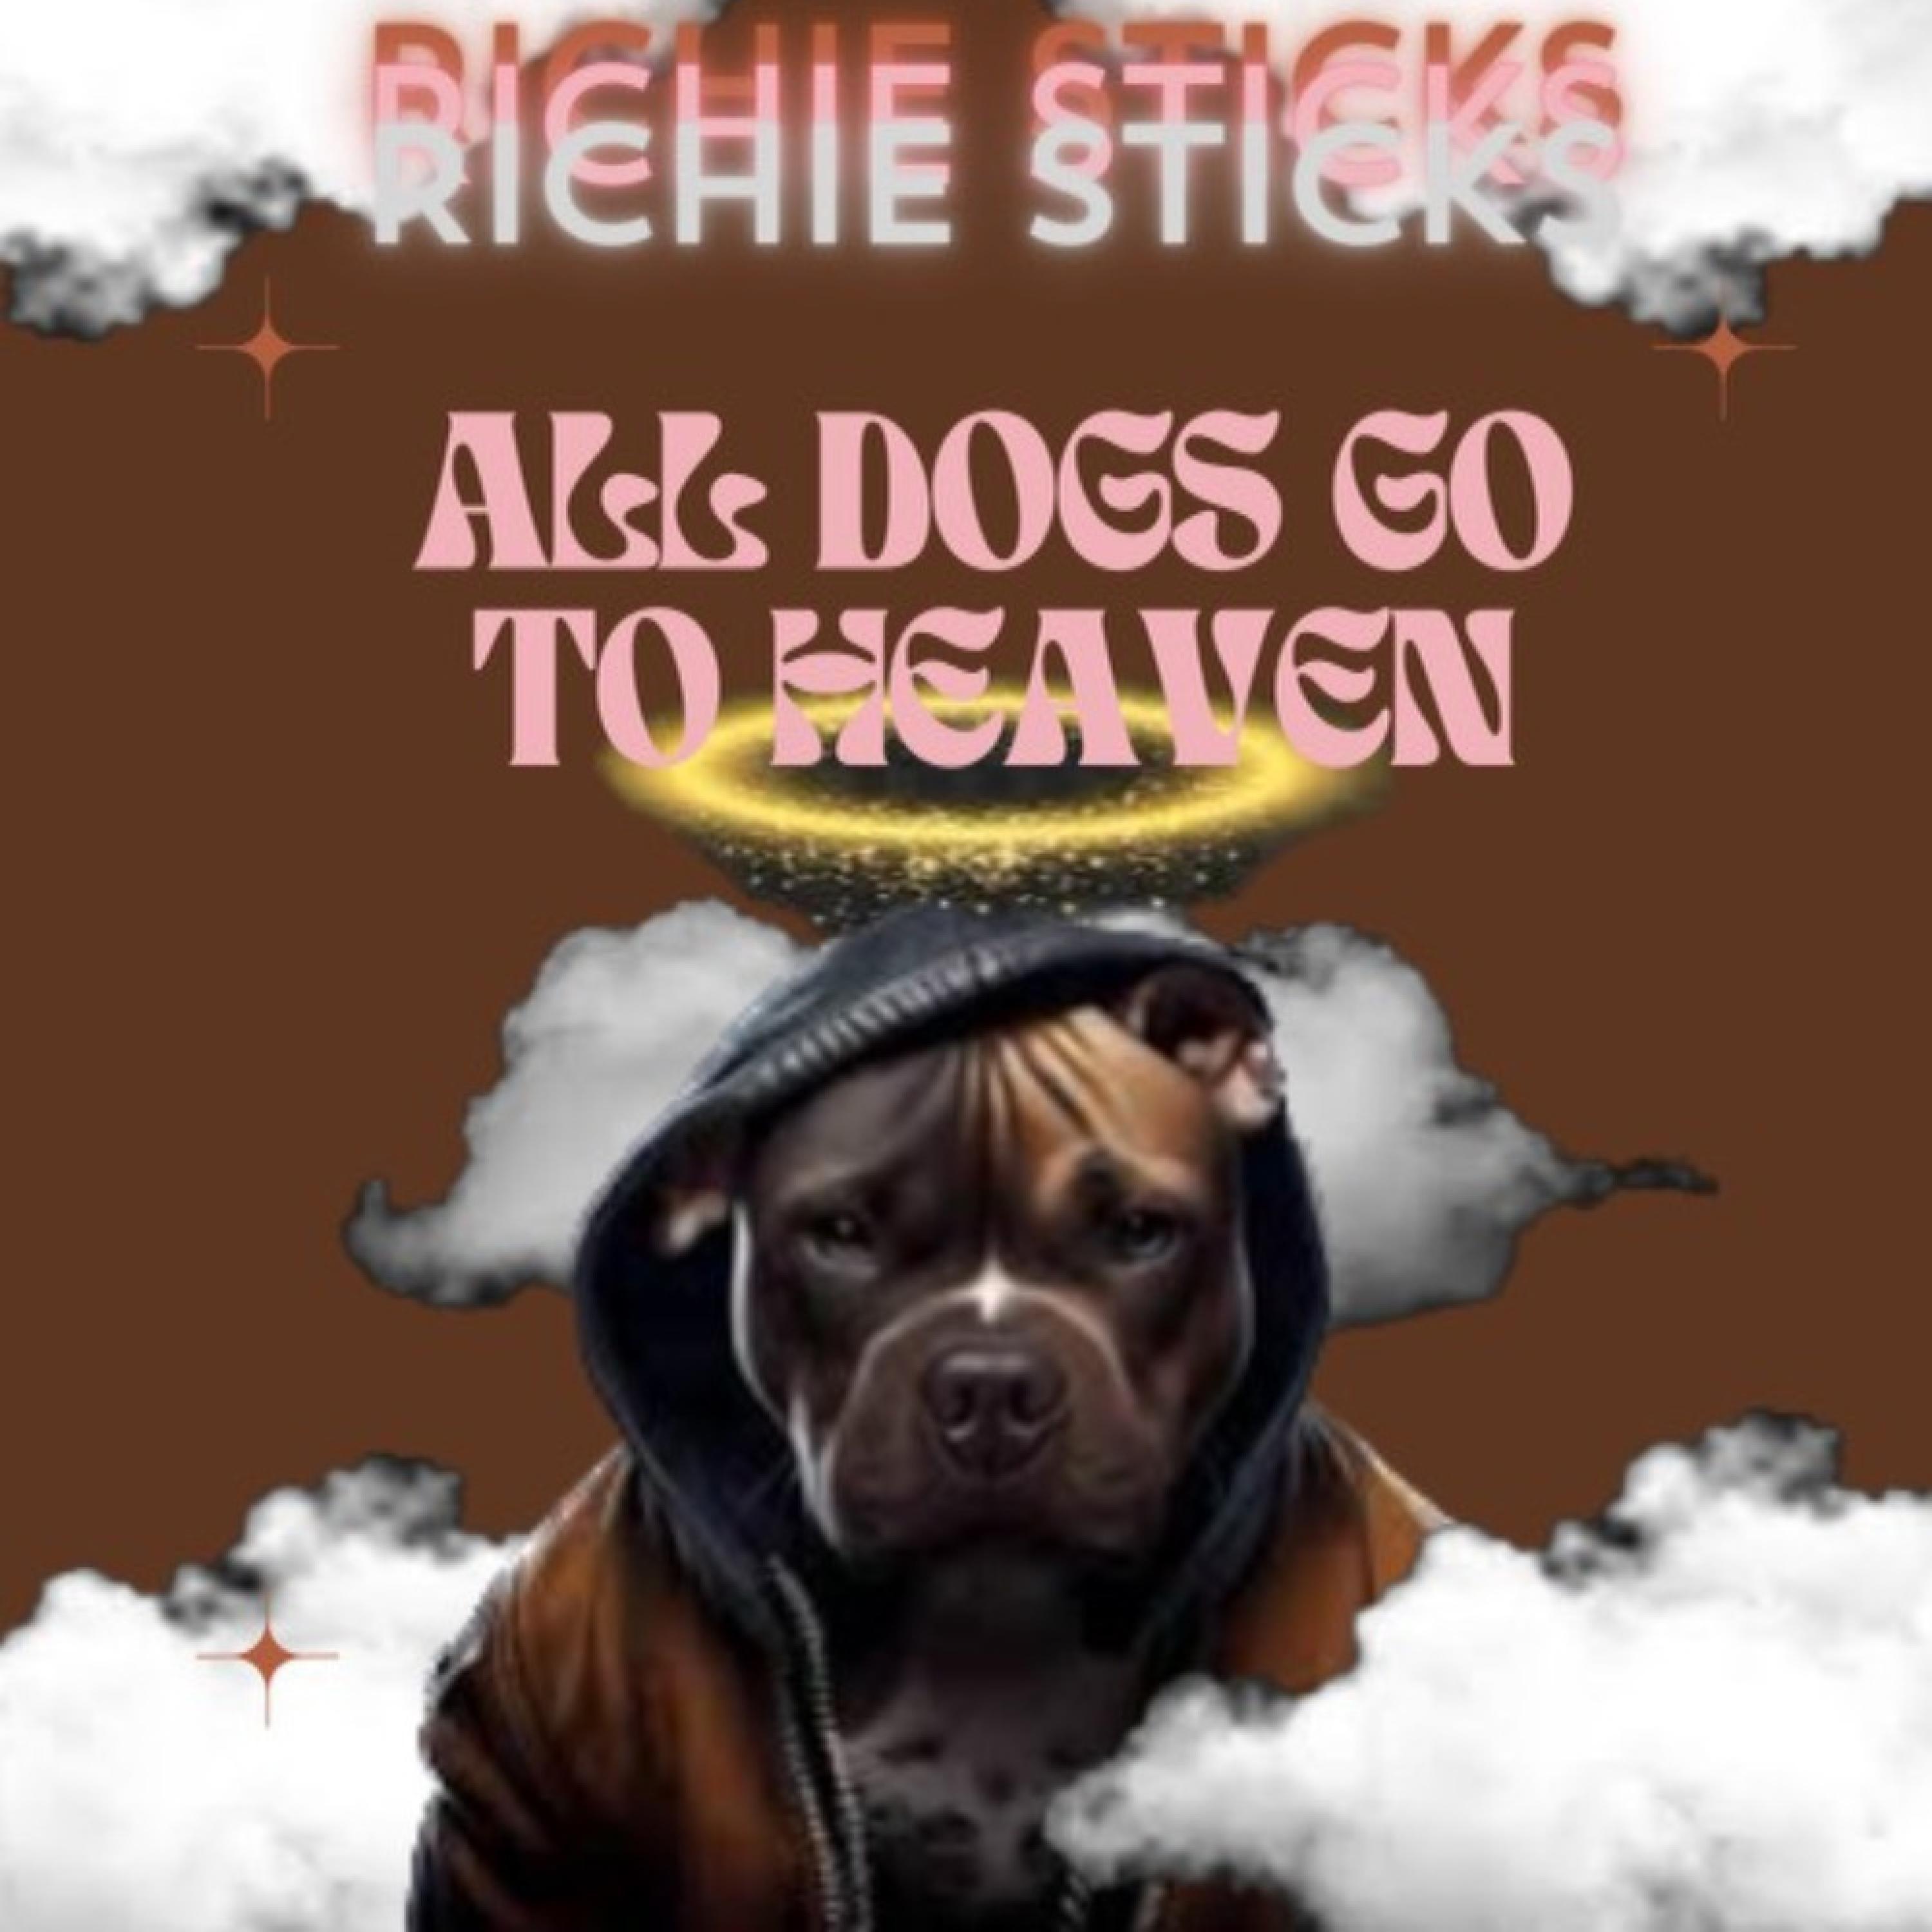 Richie Sticks - All Dogs Go To Heaven